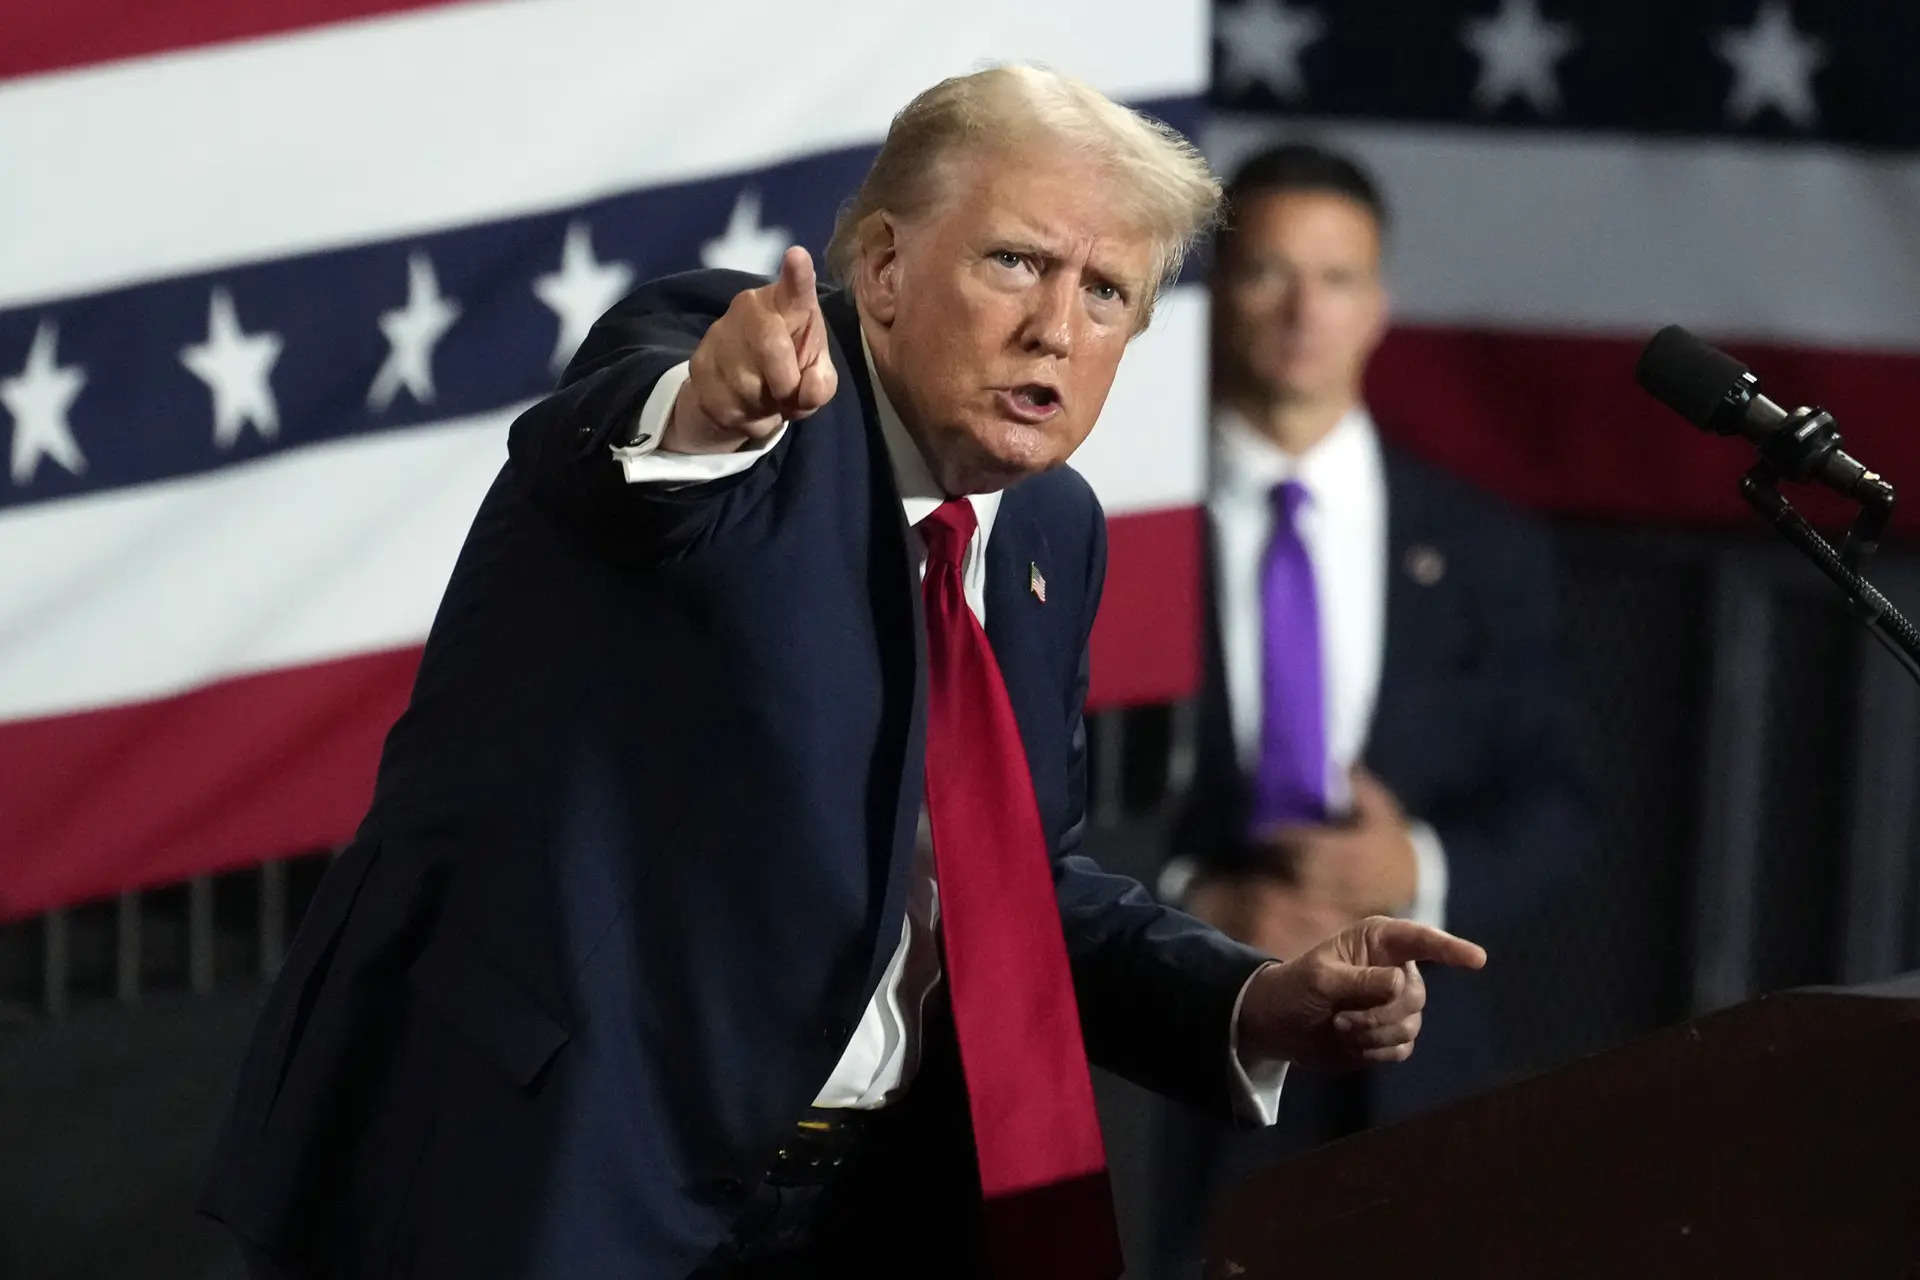 Trump turns his full focus on Harris at his first rally since Biden's exit from the 2024 race 